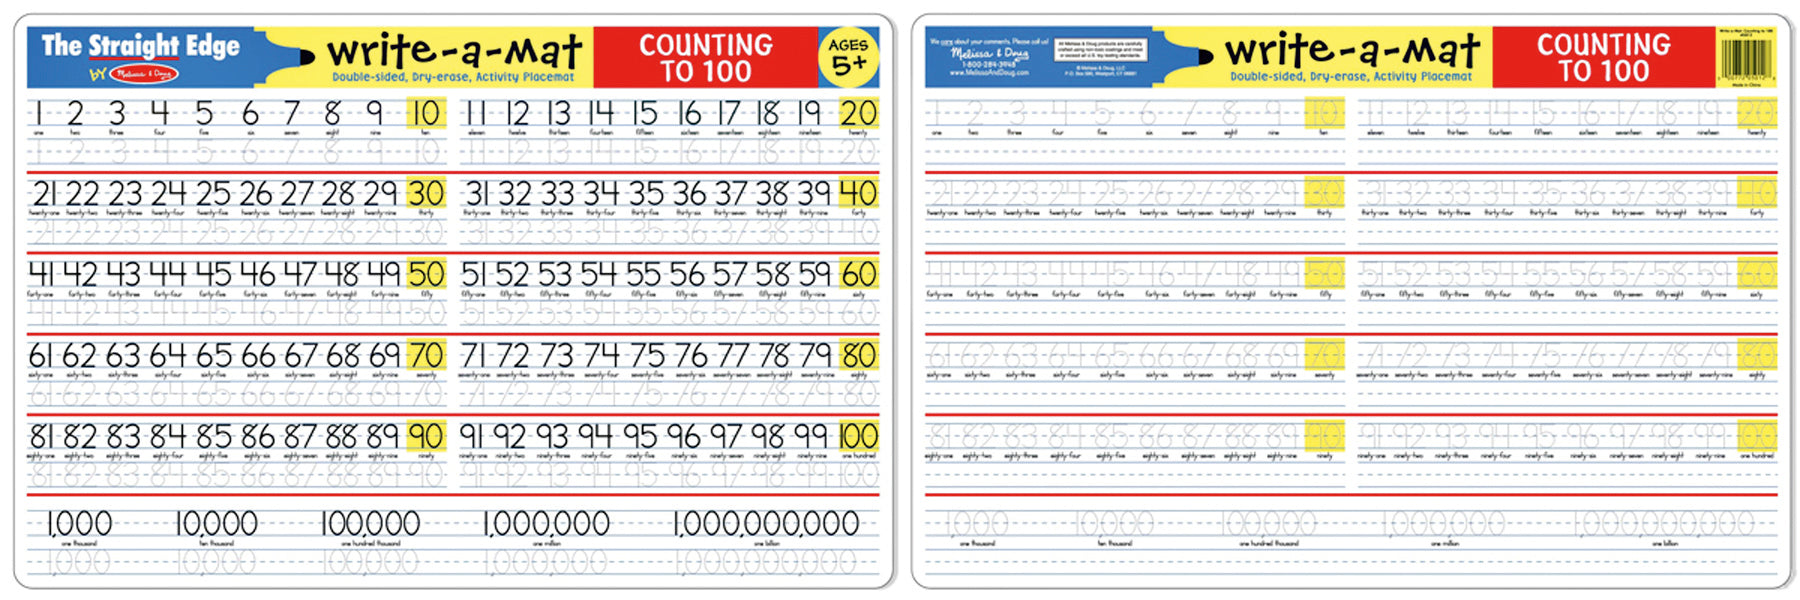 Counting to 100 Write-A-Mat Melissa & Doug